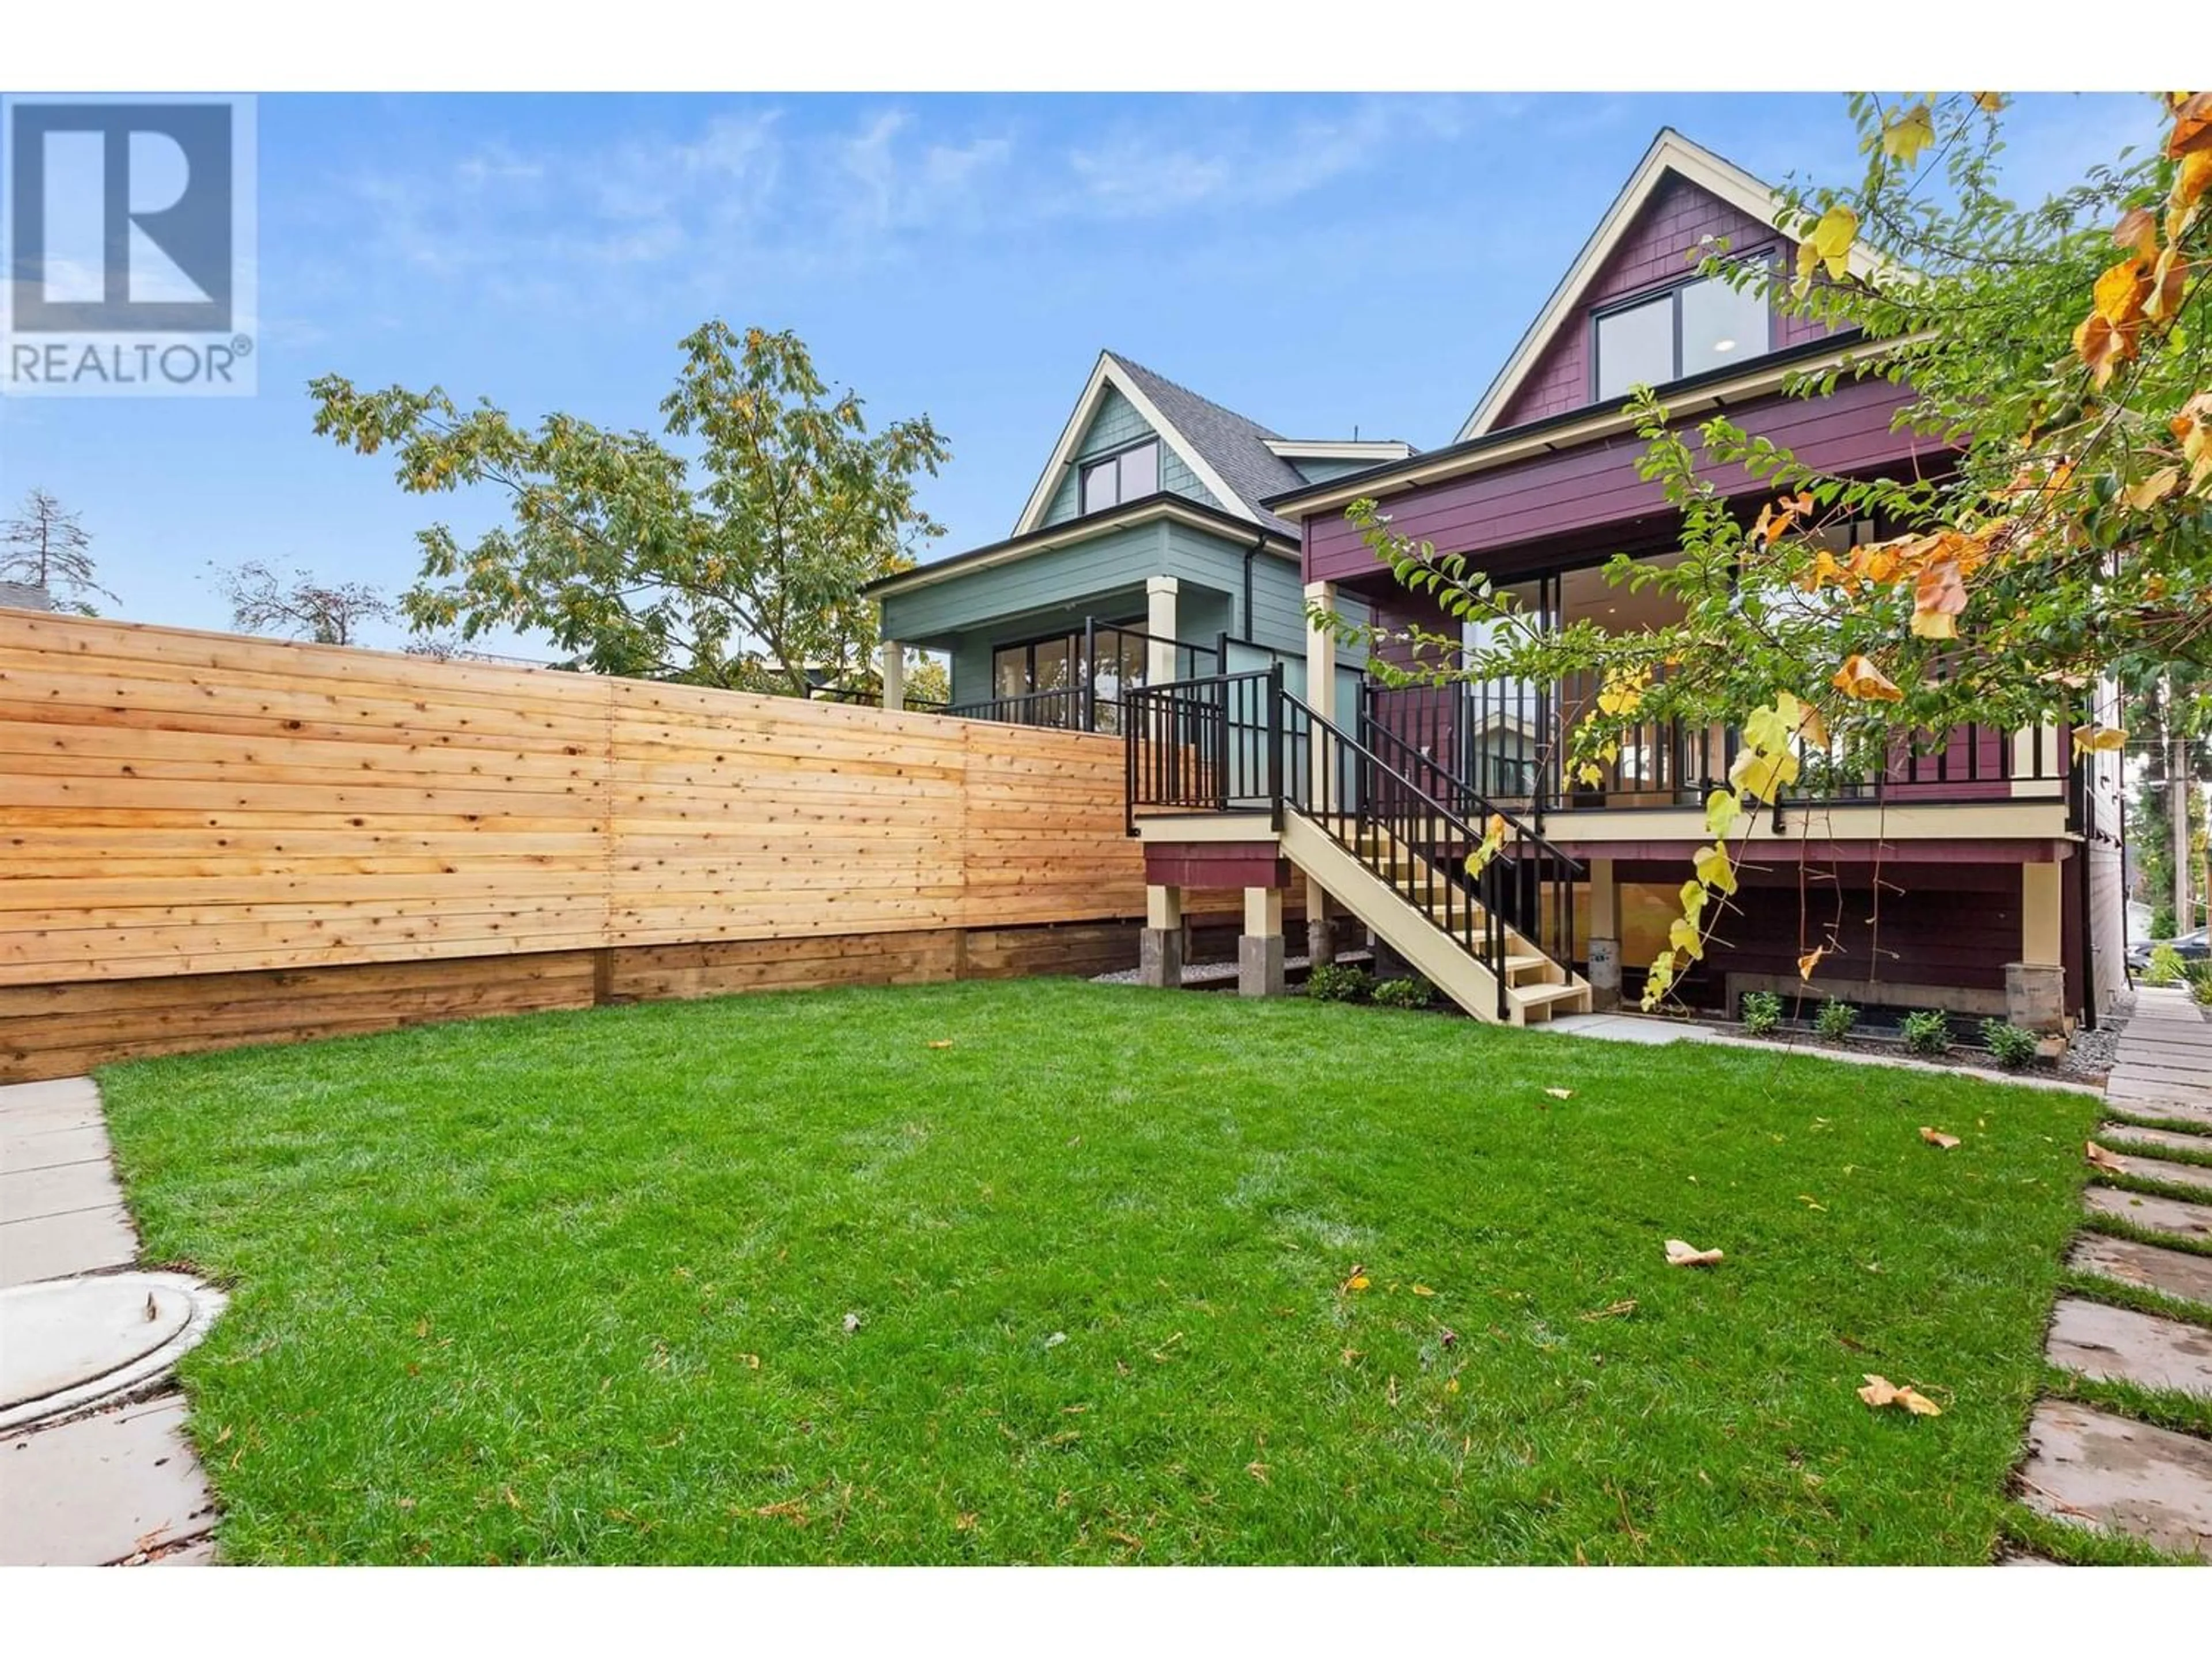 Fenced yard for 416 E 16TH STREET, North Vancouver British Columbia V7L2T5